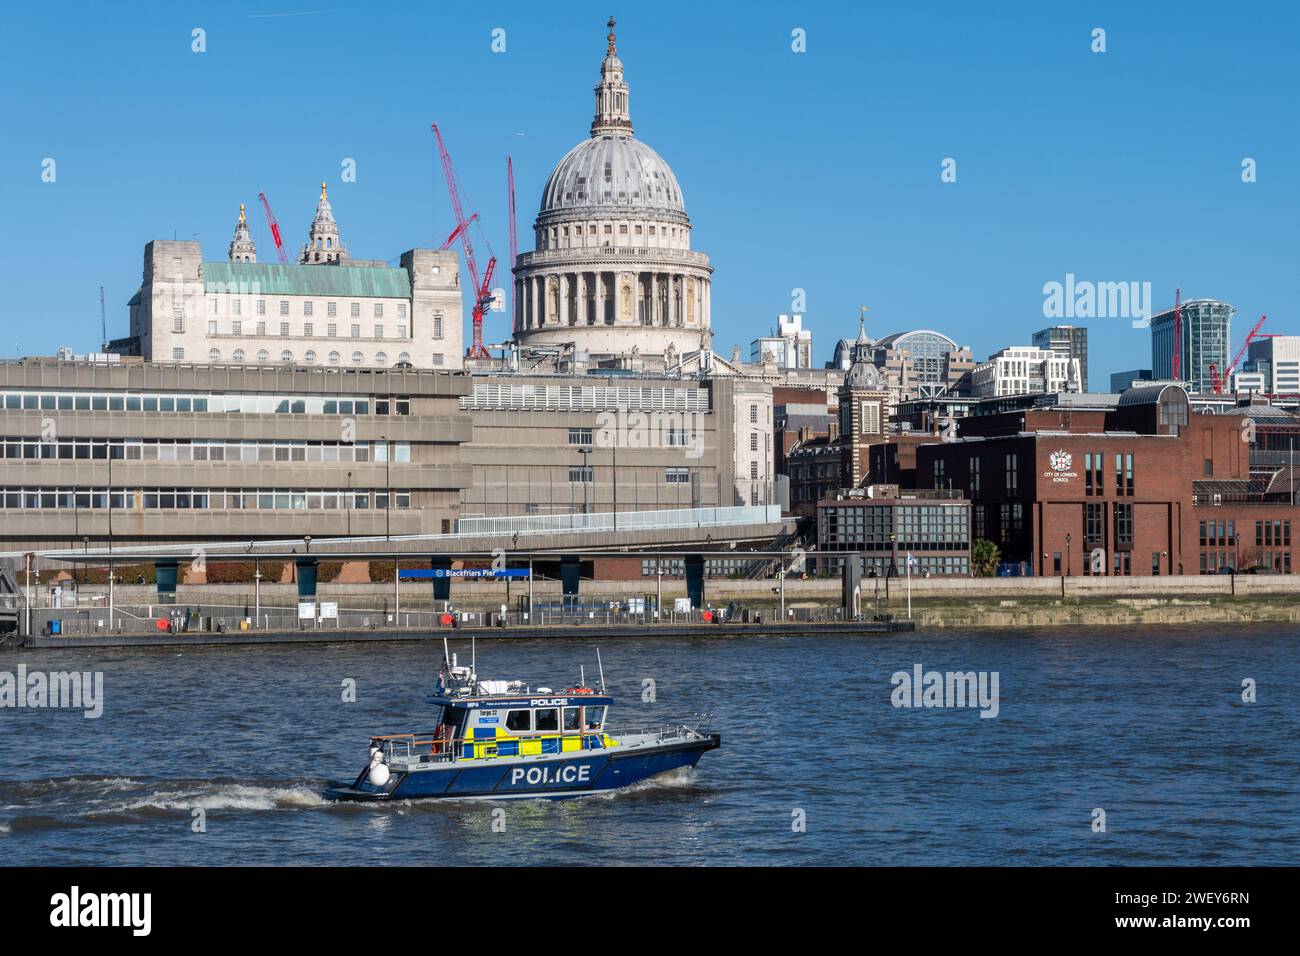 Police boat on the River Thames in central London, England, UK. Metropolitan police launch with St Paul's Cathedral in the background Stock Photo